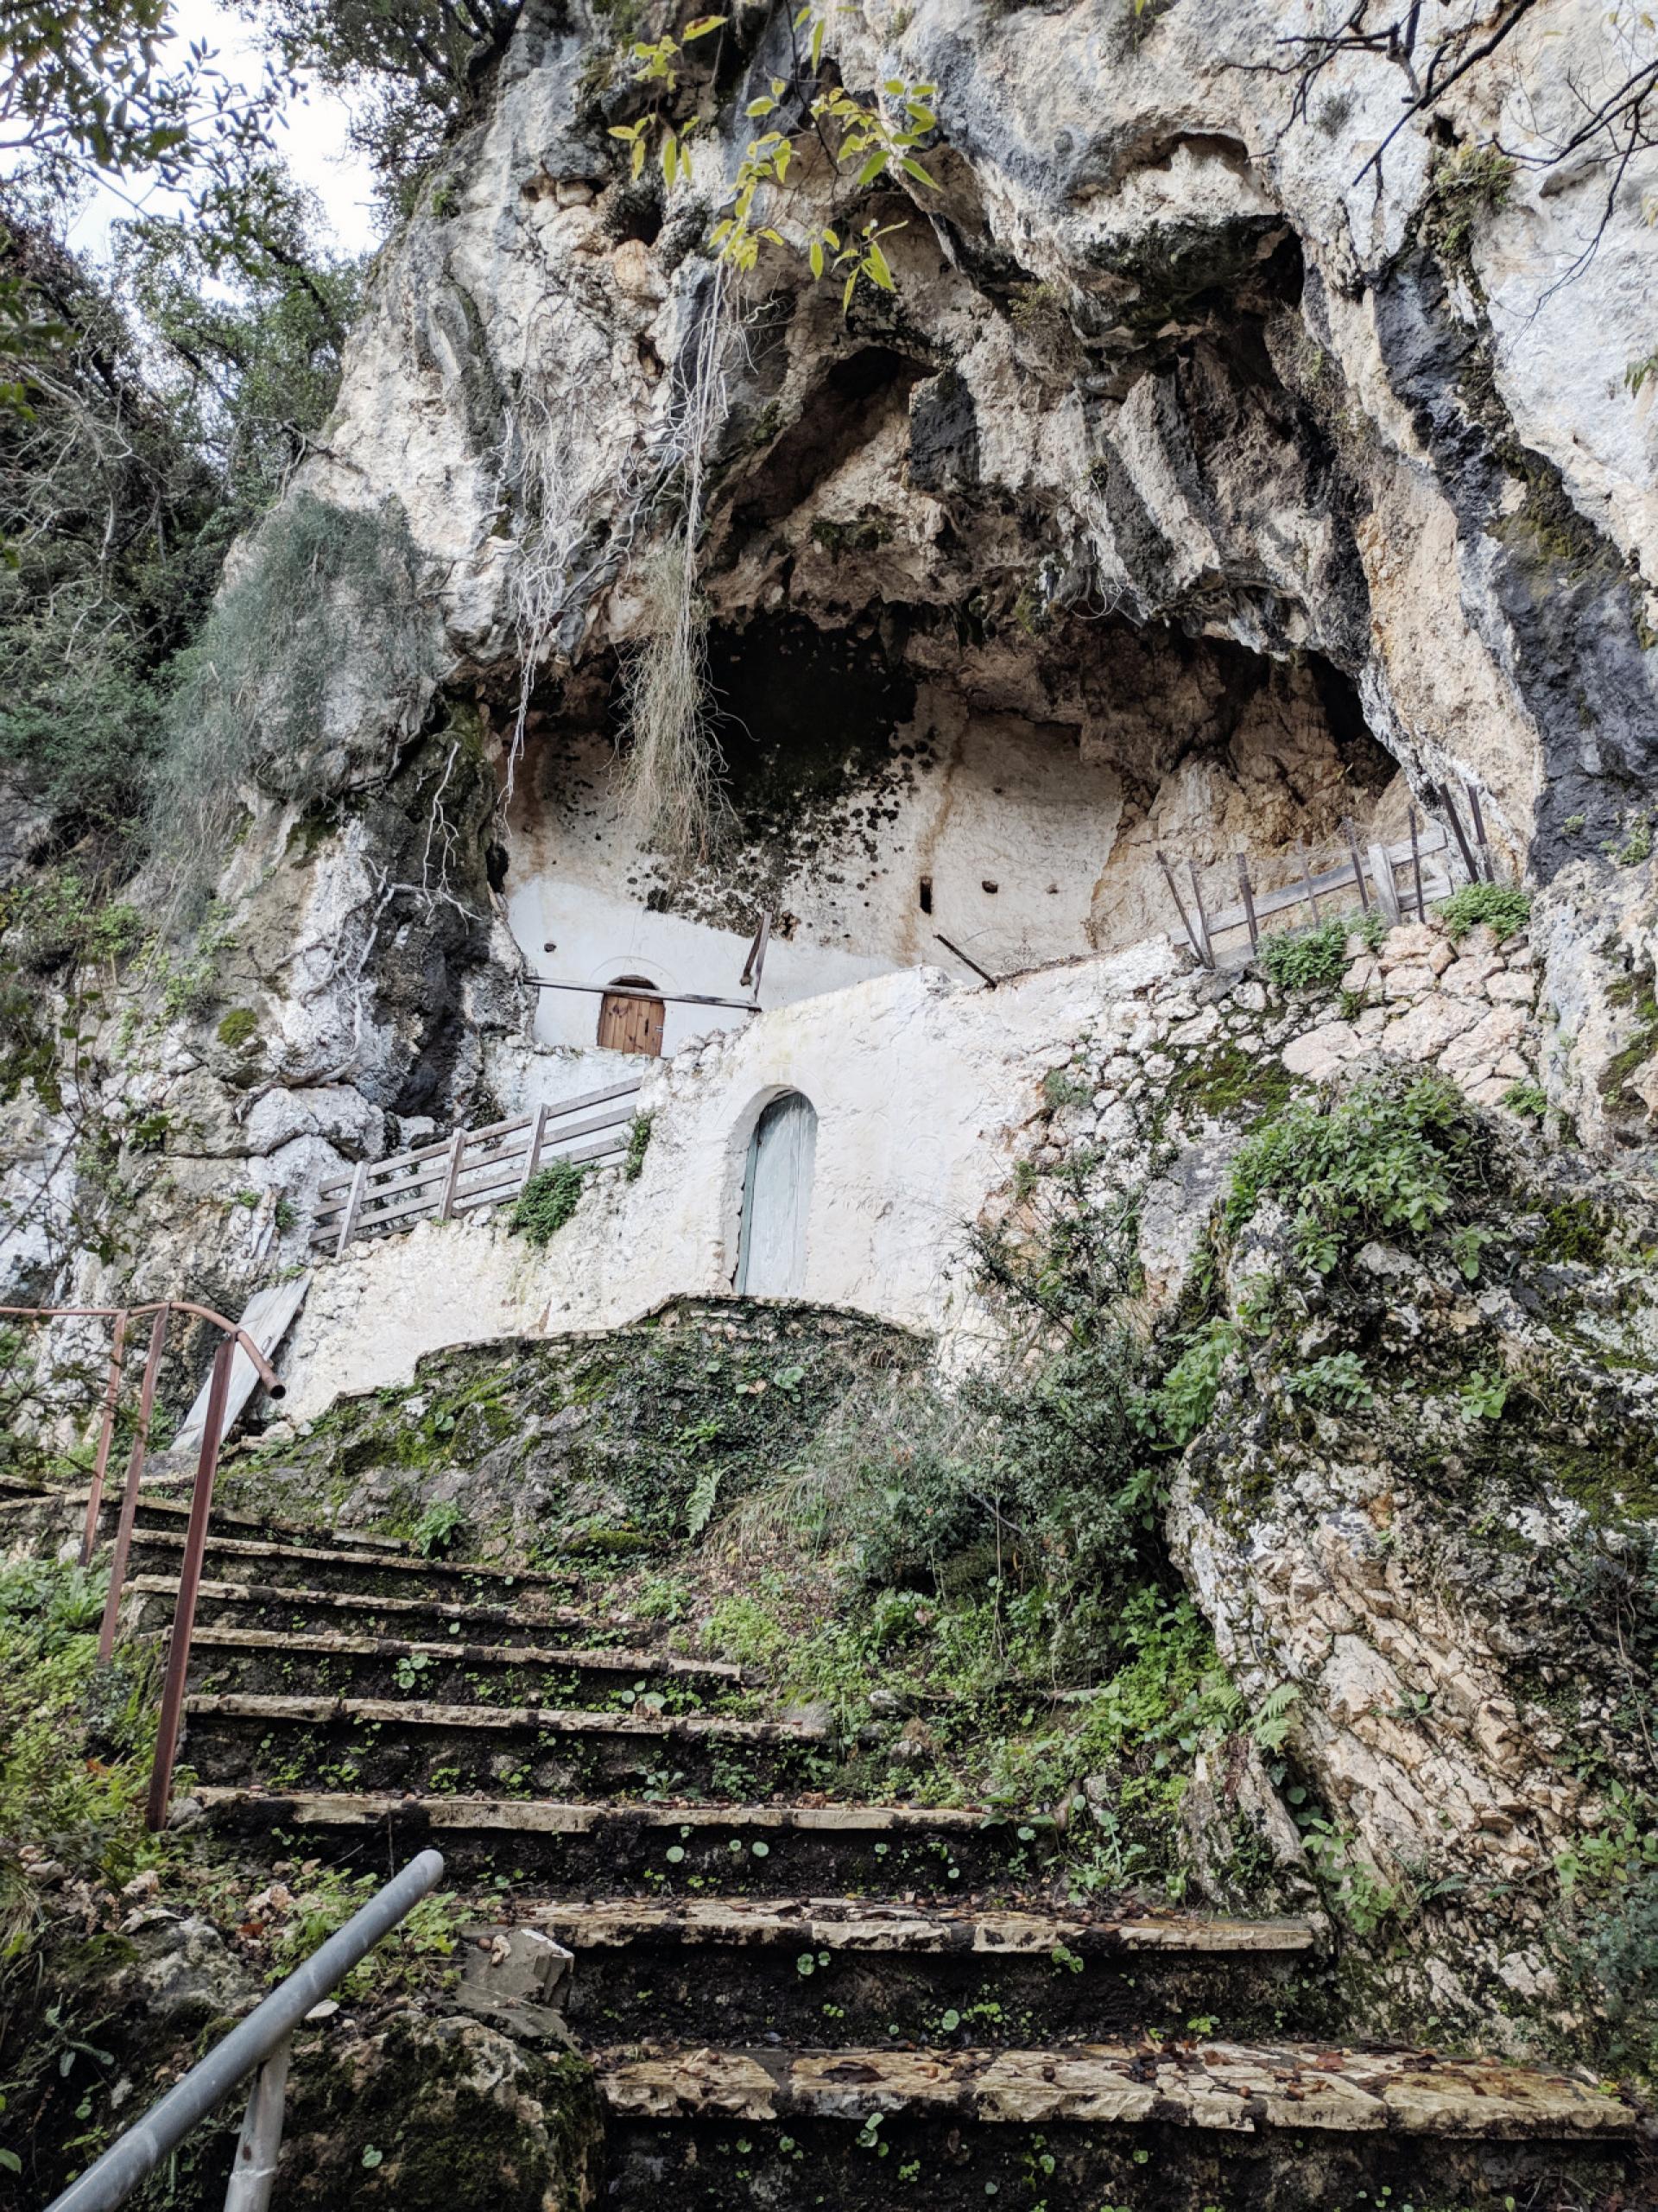 Epirus region in northwestern Greece is an area of many mythical topologies and multi-cultural identities, ranging from the Venetian influence in the coast to Ottoman villages in the interior. | Photo © Christina Serifi, TiriLab